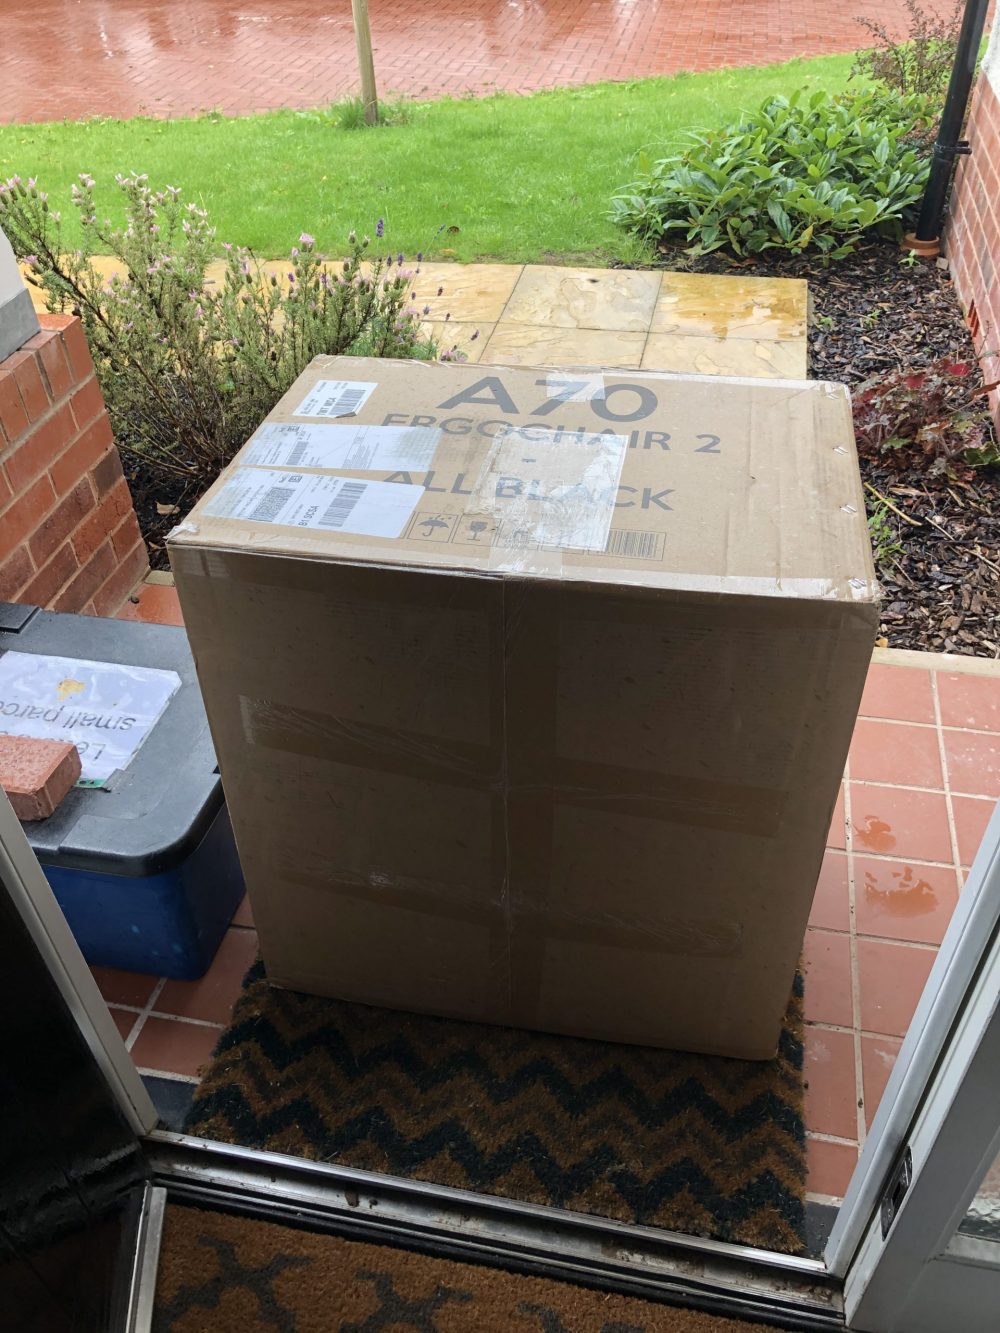 The ErgoChair 2 delivered in a large cardboard box